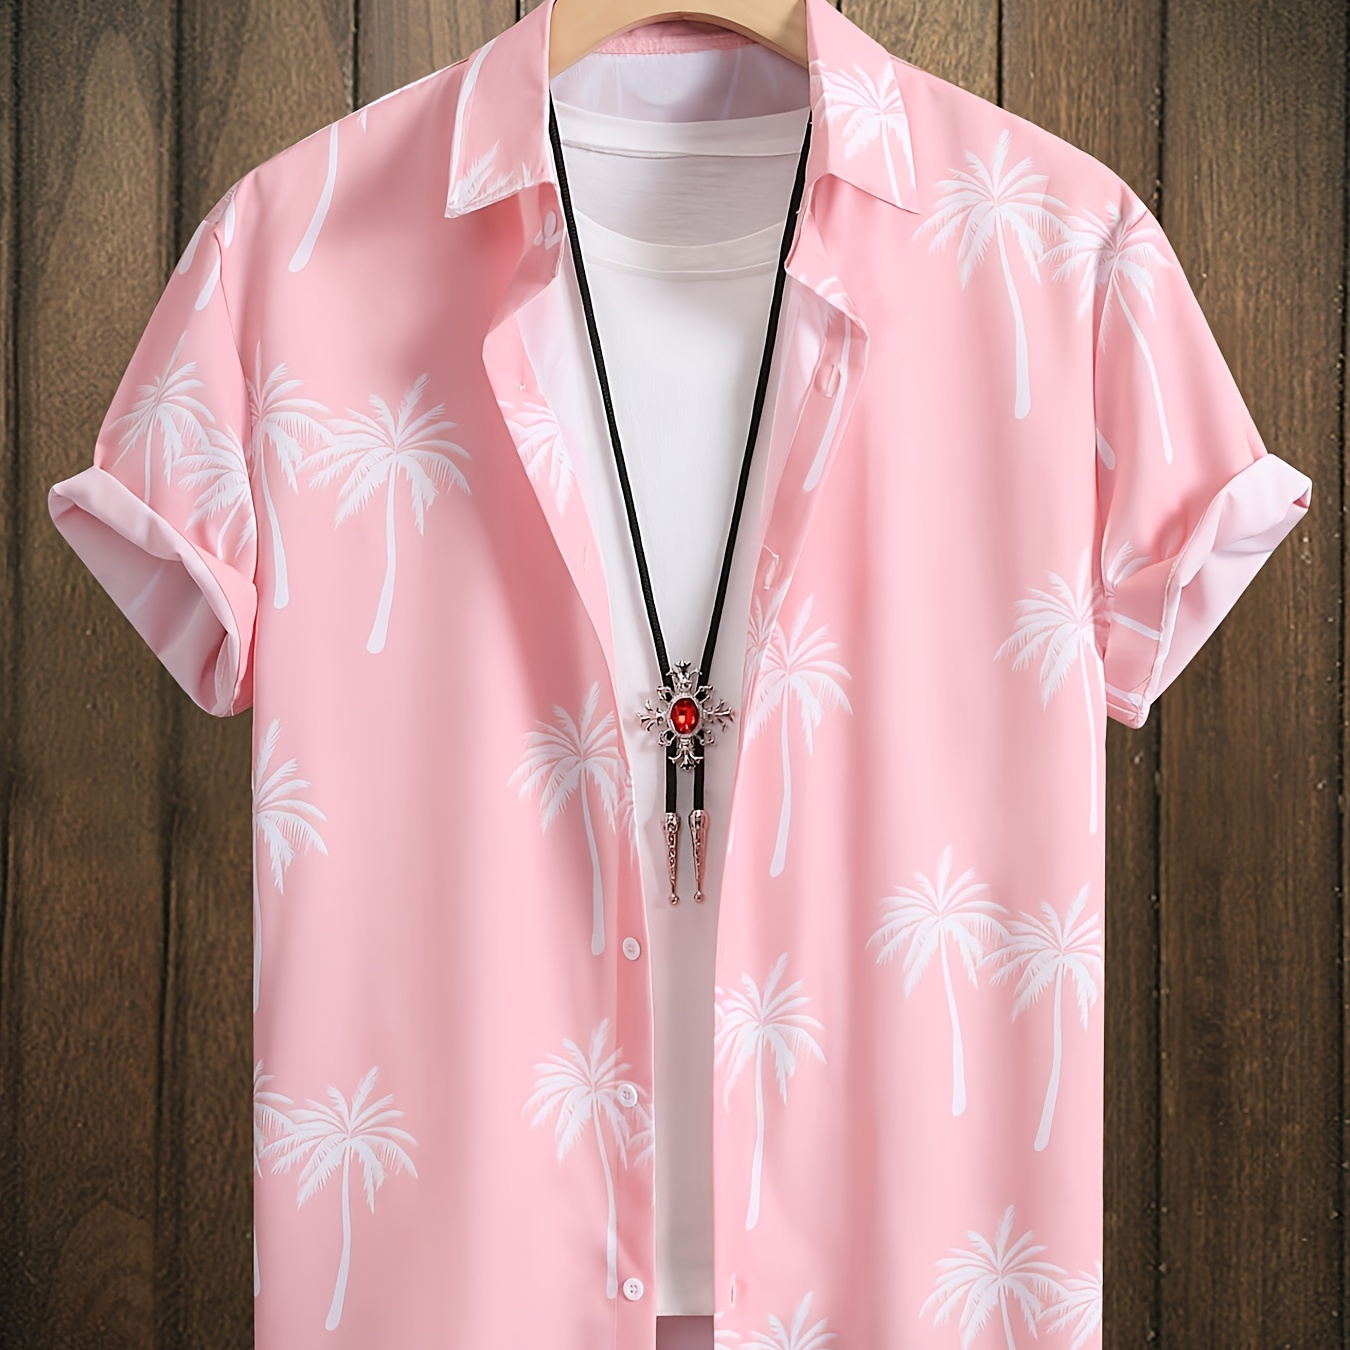 

Men's Fashion Pink With White Palm Tree Print Short-sleeve Button-down Shirt, Summer Beach Style, Relaxed Fit Soft Fabric Hawaiian Top